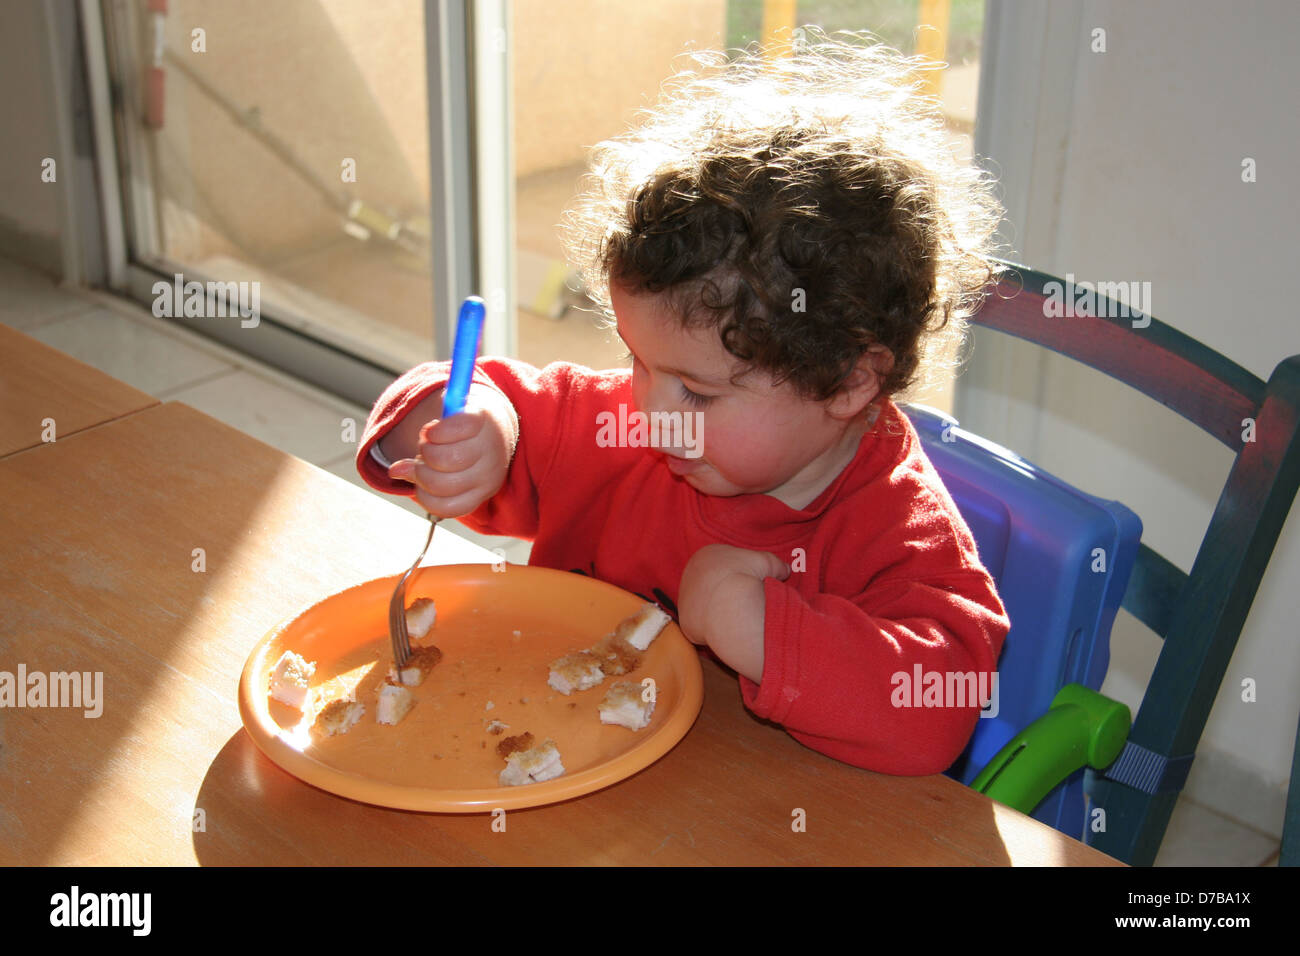 young child eating by herself Stock Photo